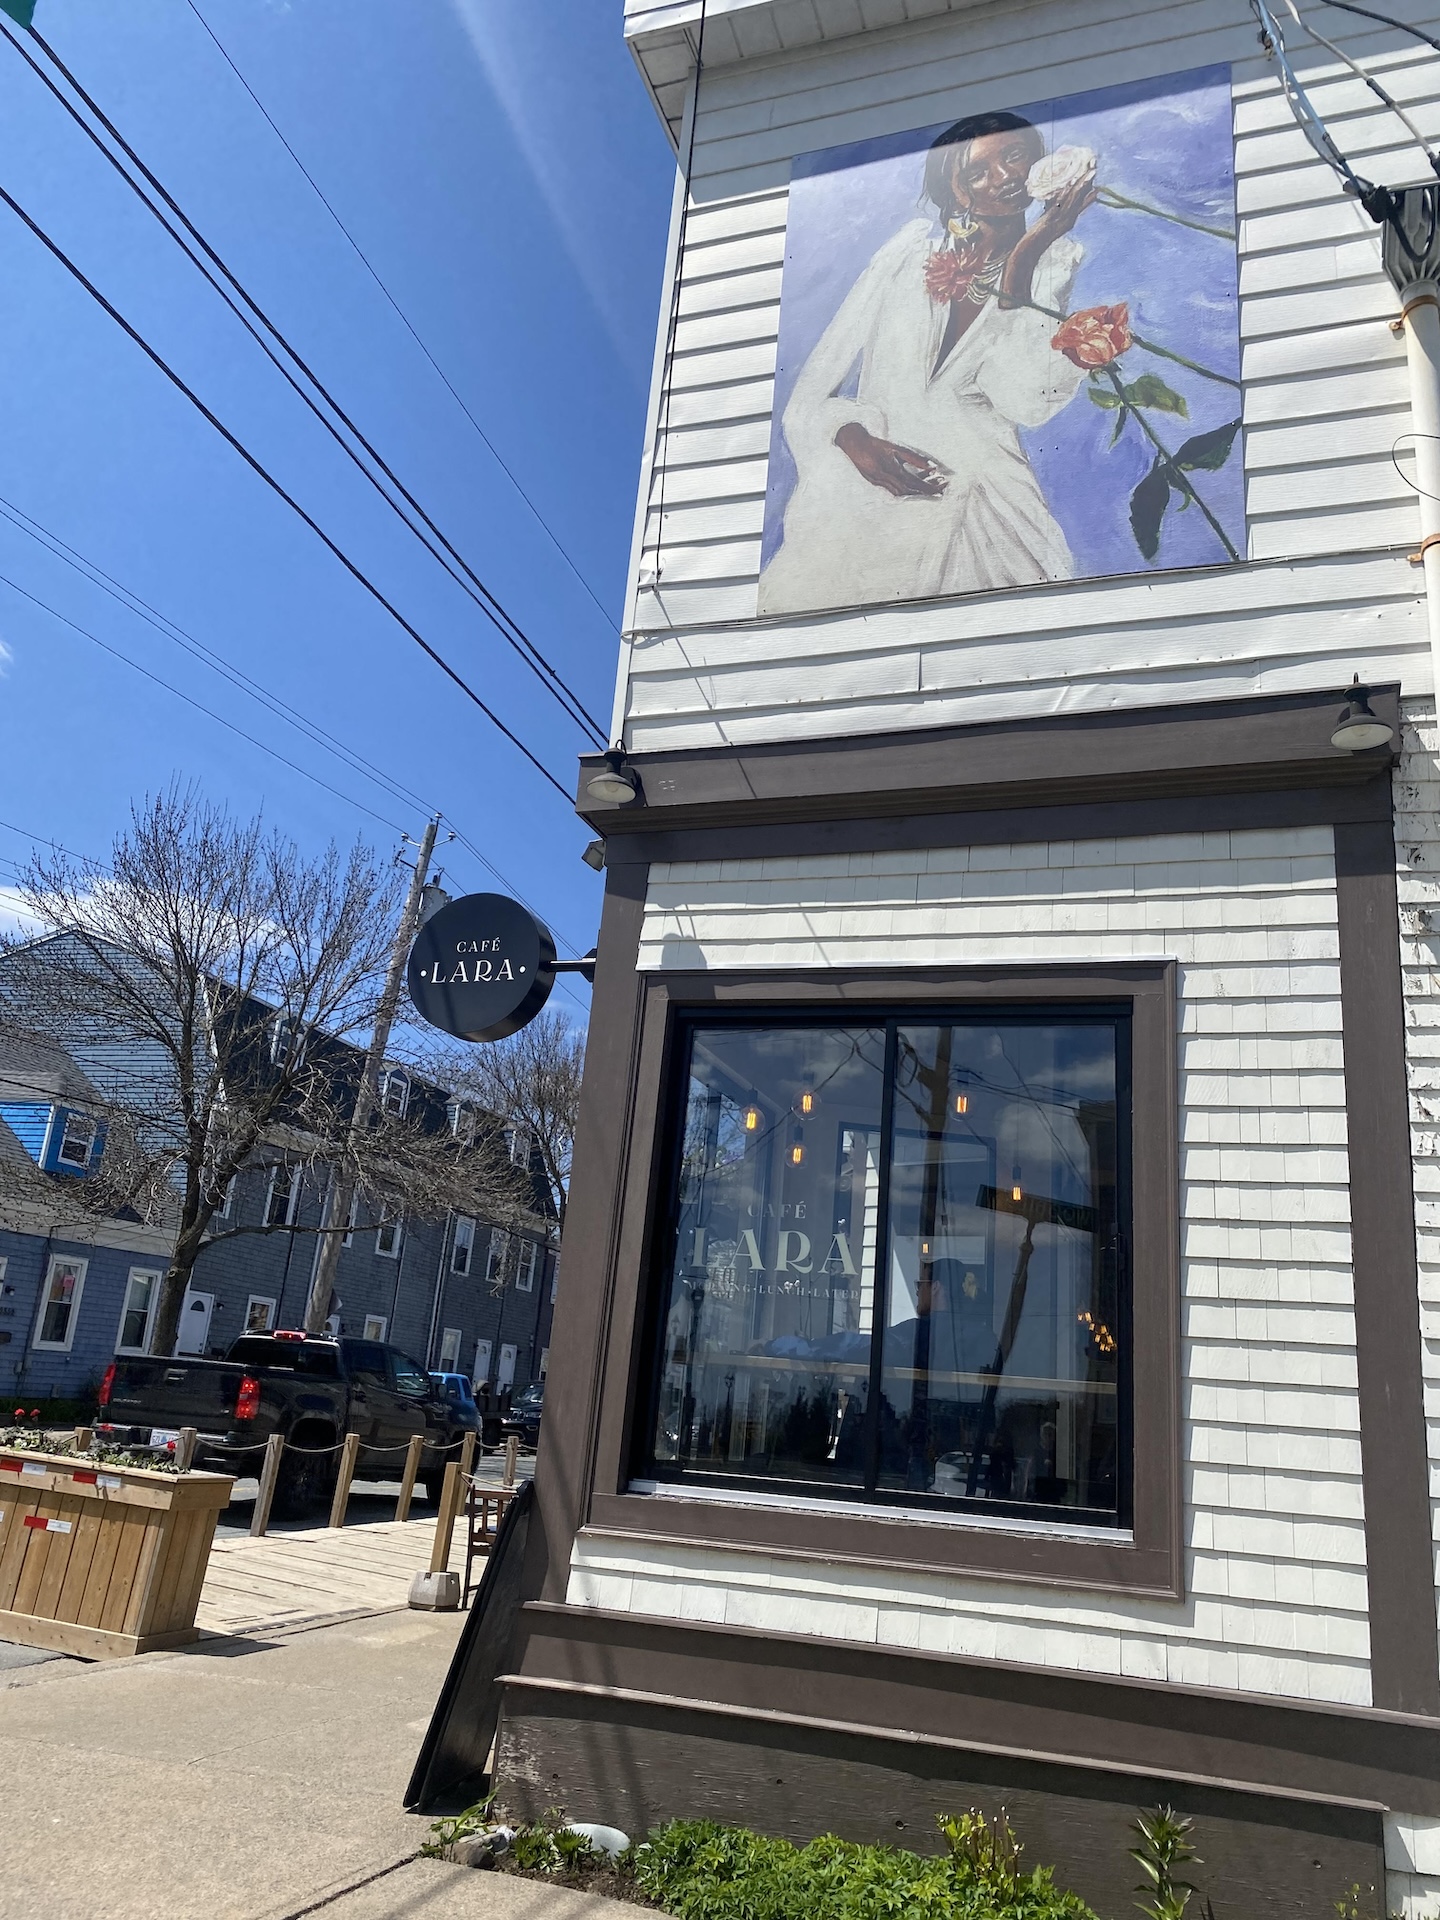 Give Her Flowers, a digitally printed mural on top of Cafe Lara in Halifax by artist Jasmin-Nicole Amoako as part of STEPS Public Art's CreateSpace Public Art Residency